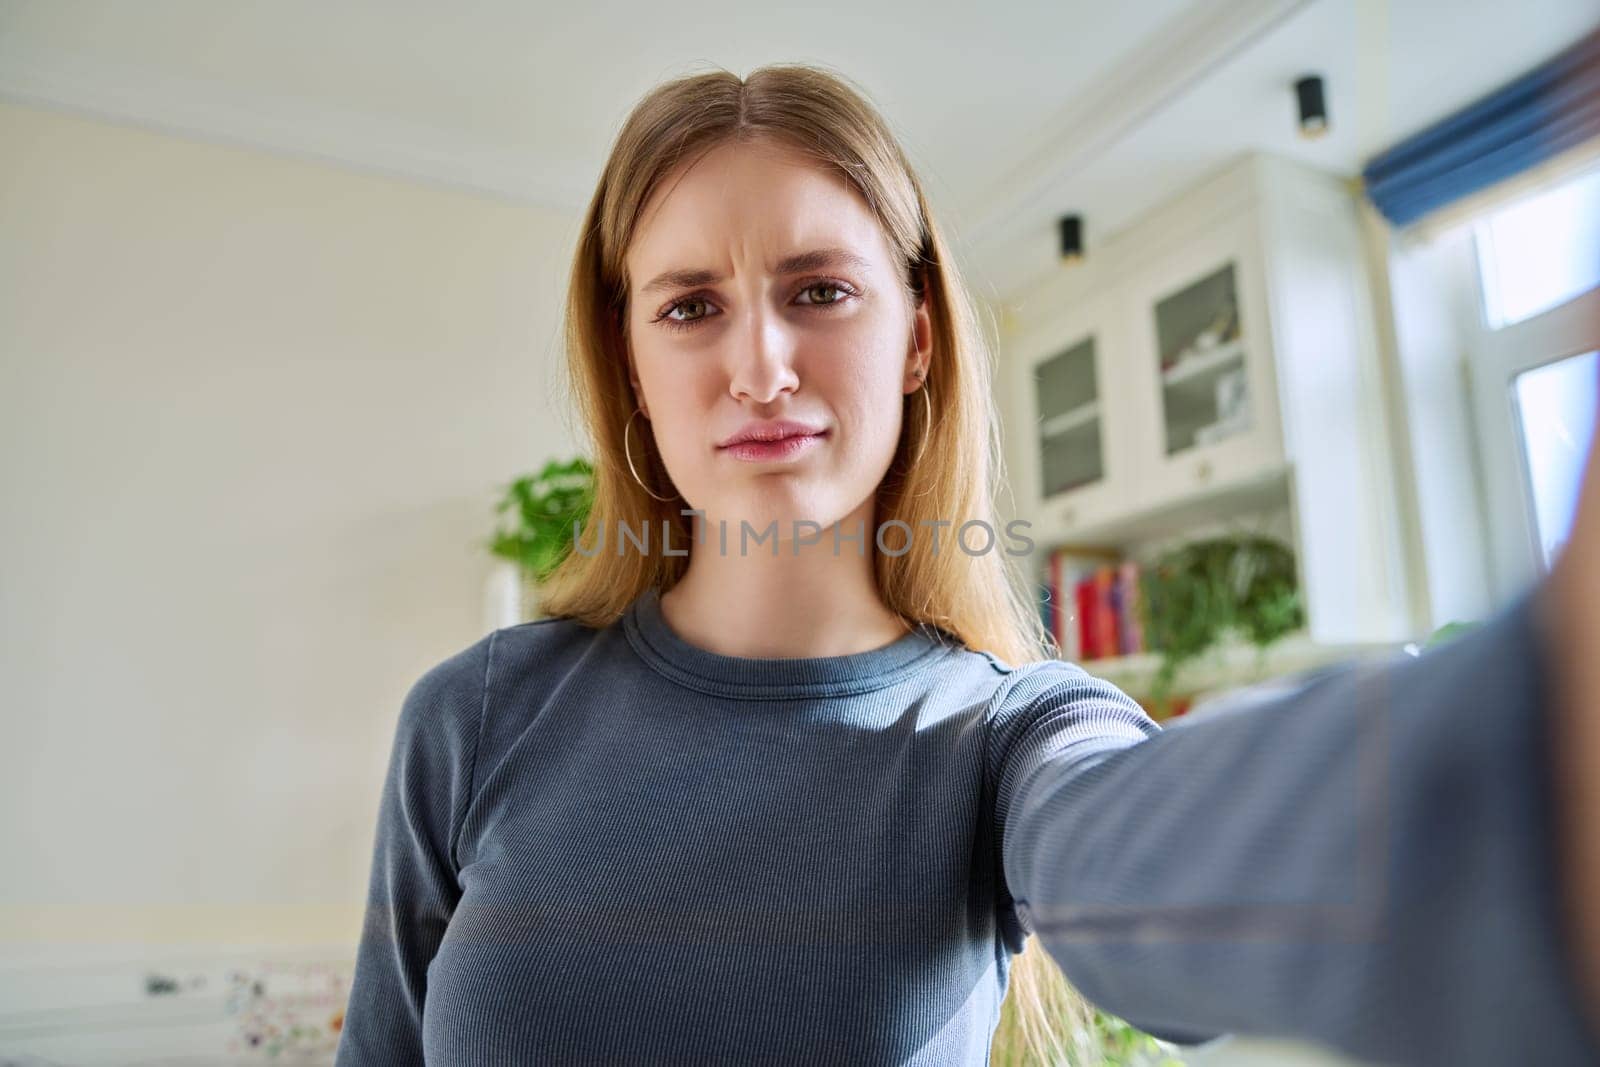 Close-up selfie portrait of teenage confused concentrated grimacing young female looking at web camera. Serious teenage girl 16, 17, 18 years old with blond hair, in home. Beauty, lifestyle, youth